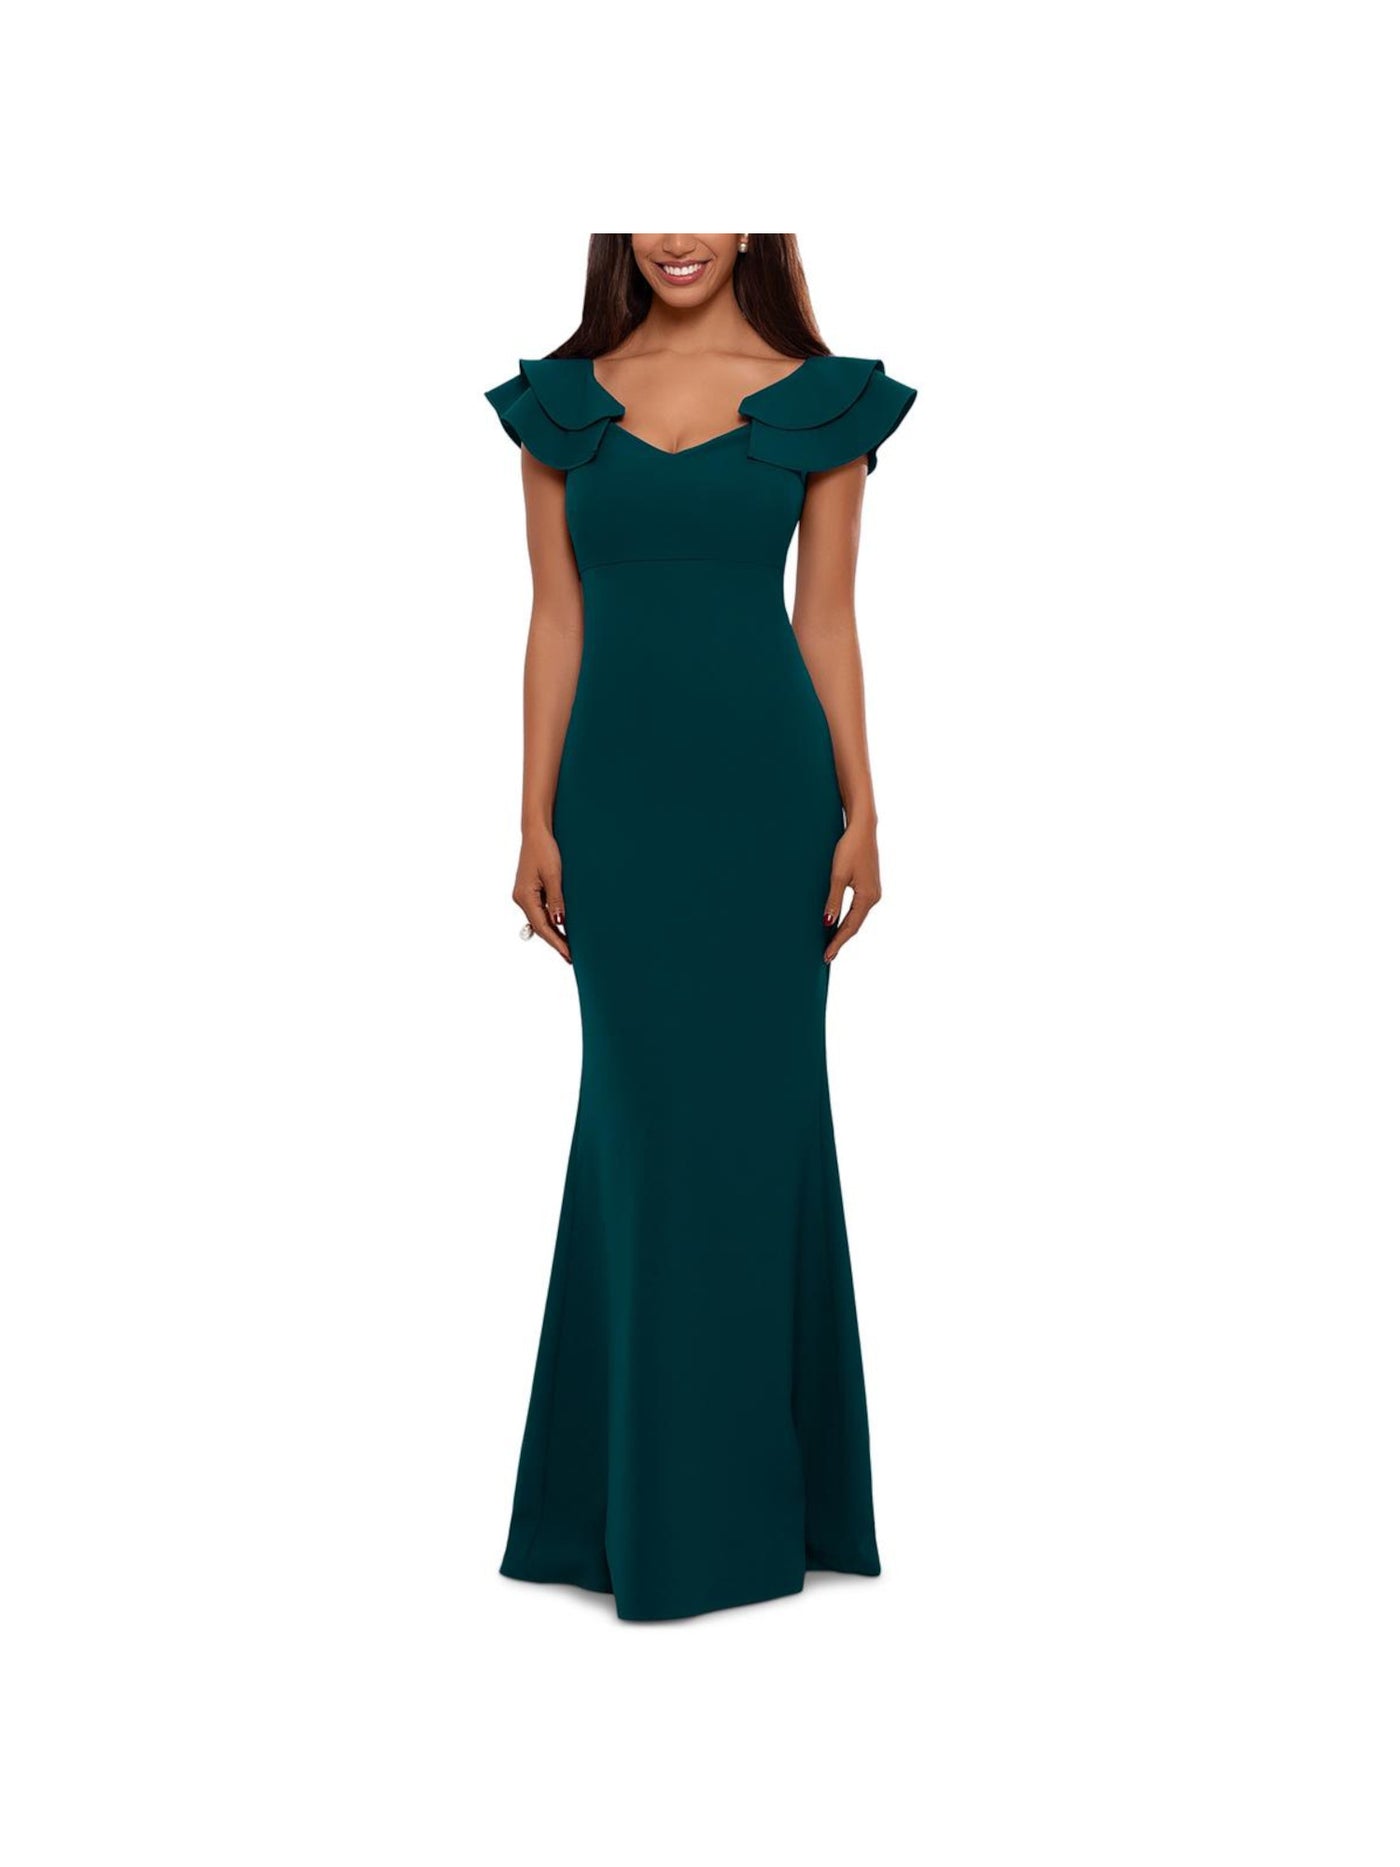 BETSY & ADAM Womens Green Zippered Fitted Lined Ruffled Strap V Neck Full-Length Evening Gown Dress 4